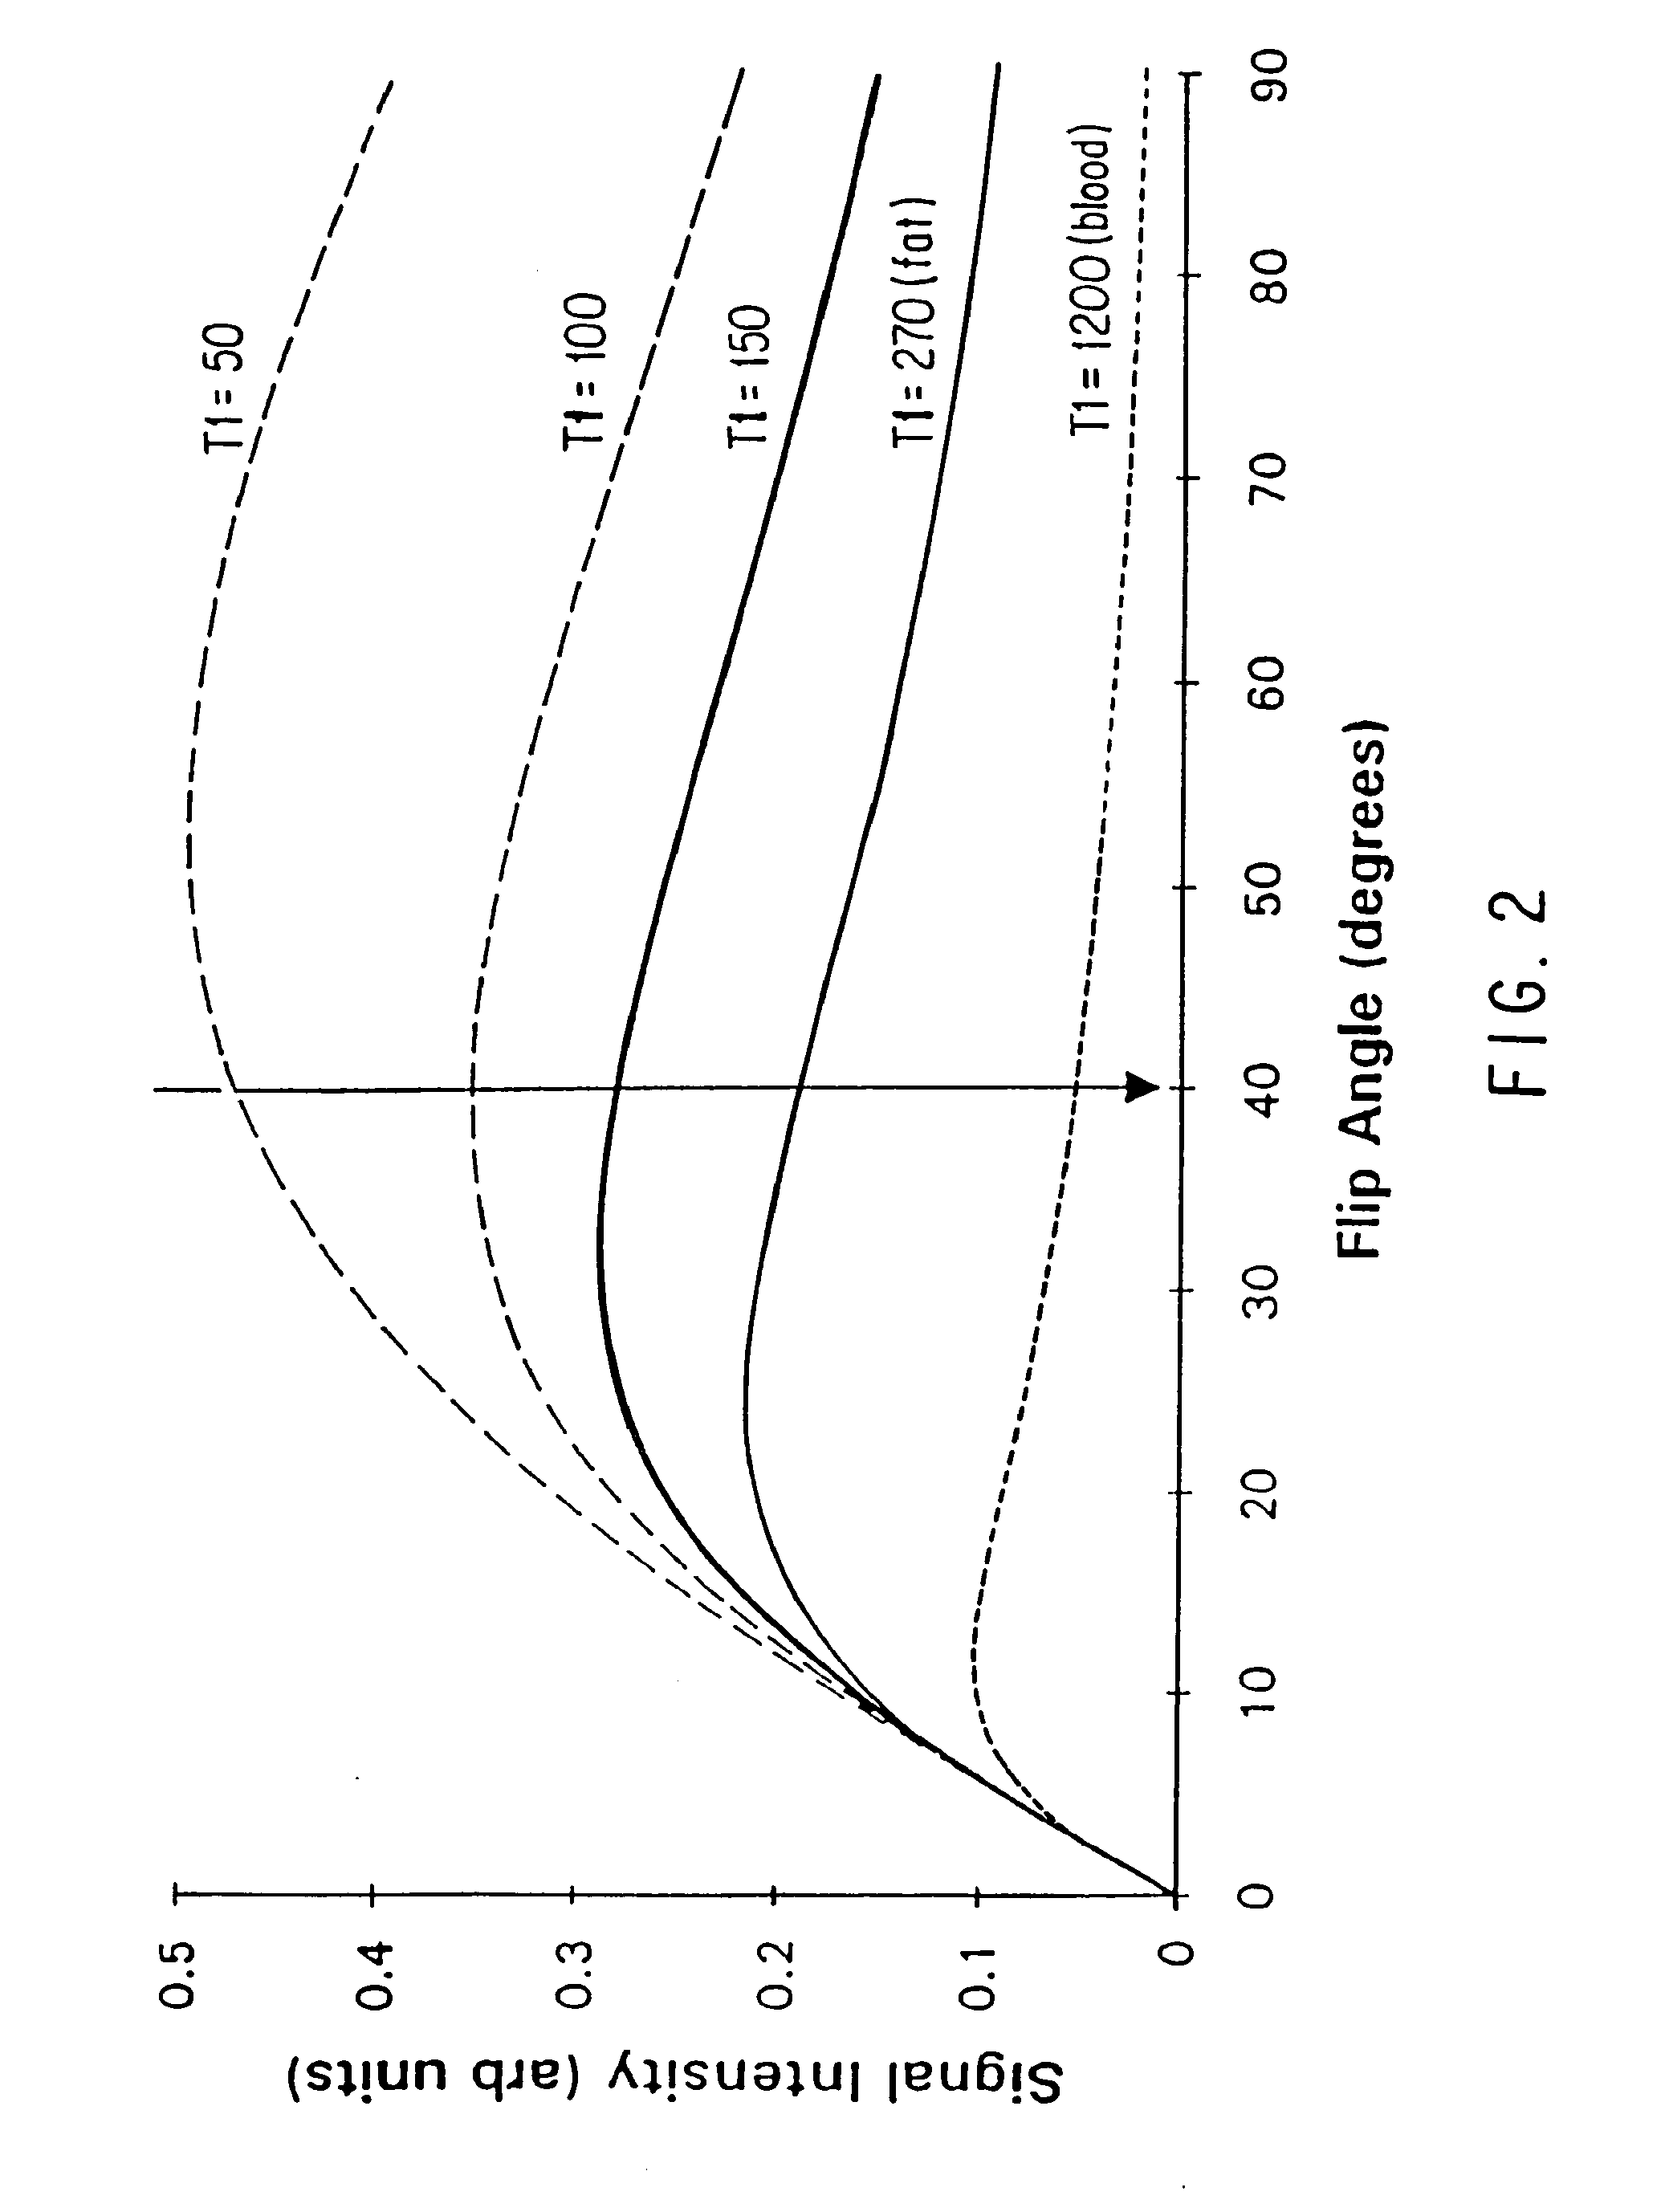 Method and apparatus for imaging abdominal aorta and aortic aneurysms